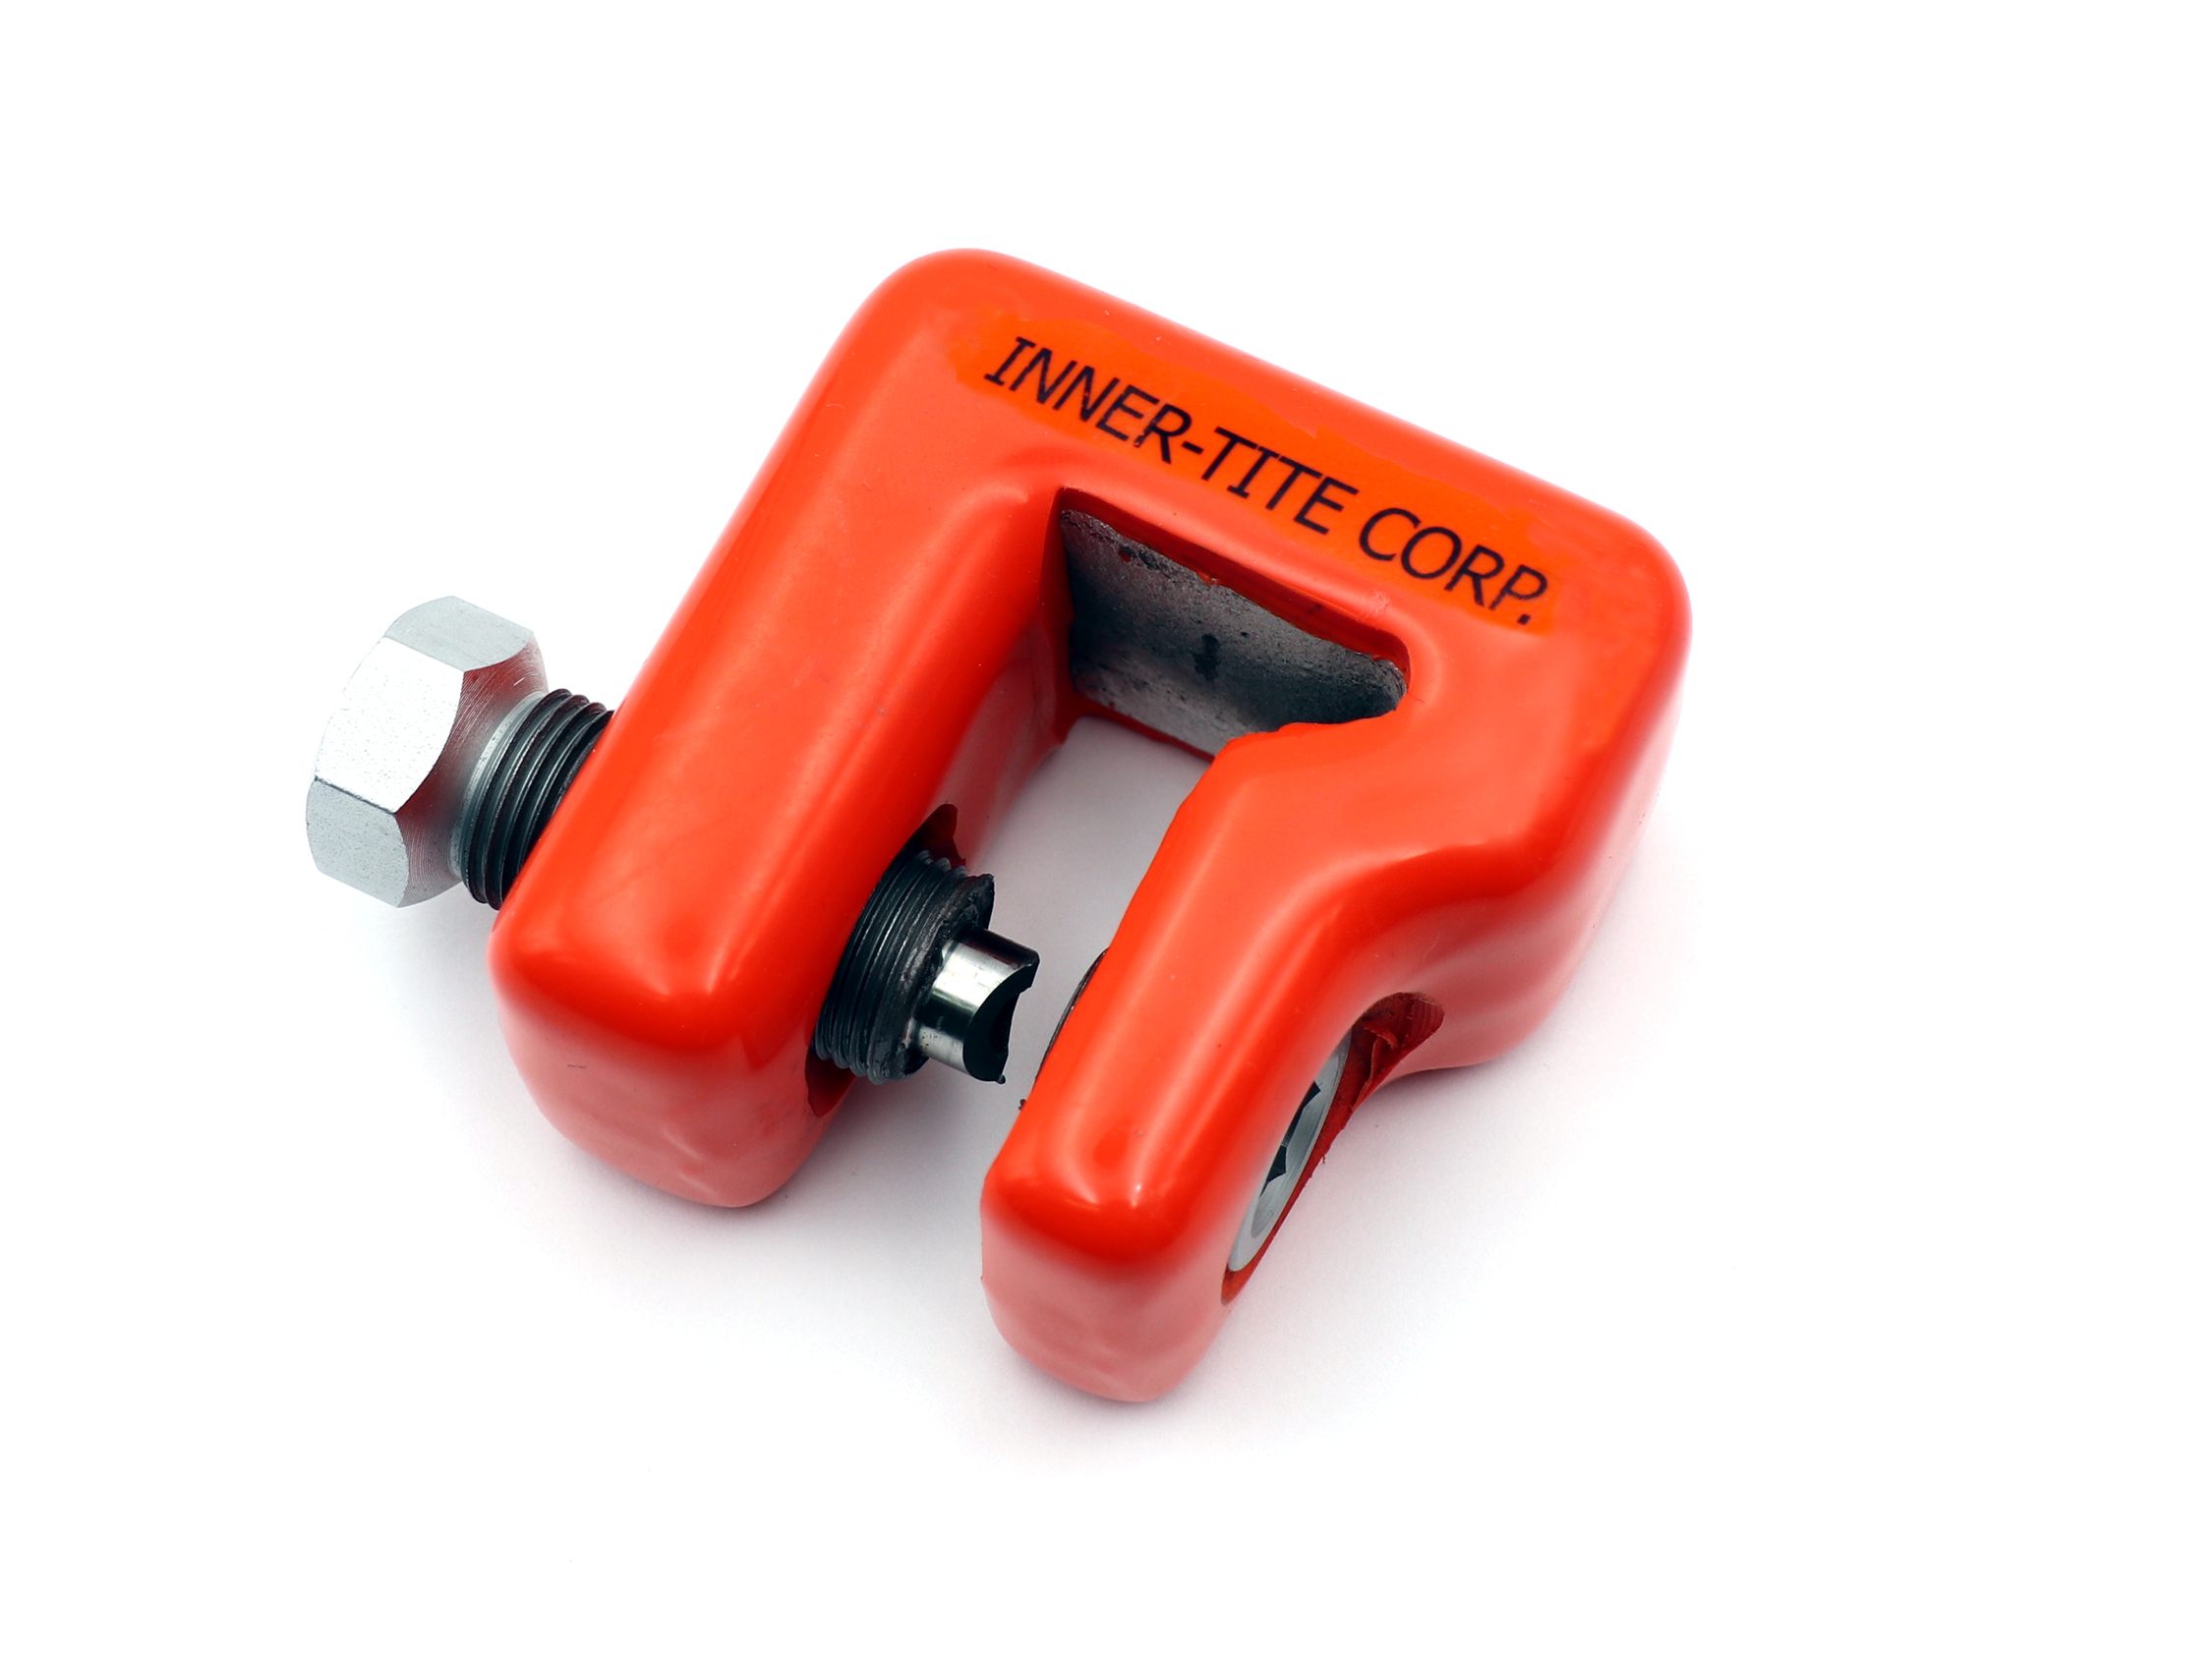 The Small Insulated Punching Tool is also available without a handle allowing for easier use in confined spaces.